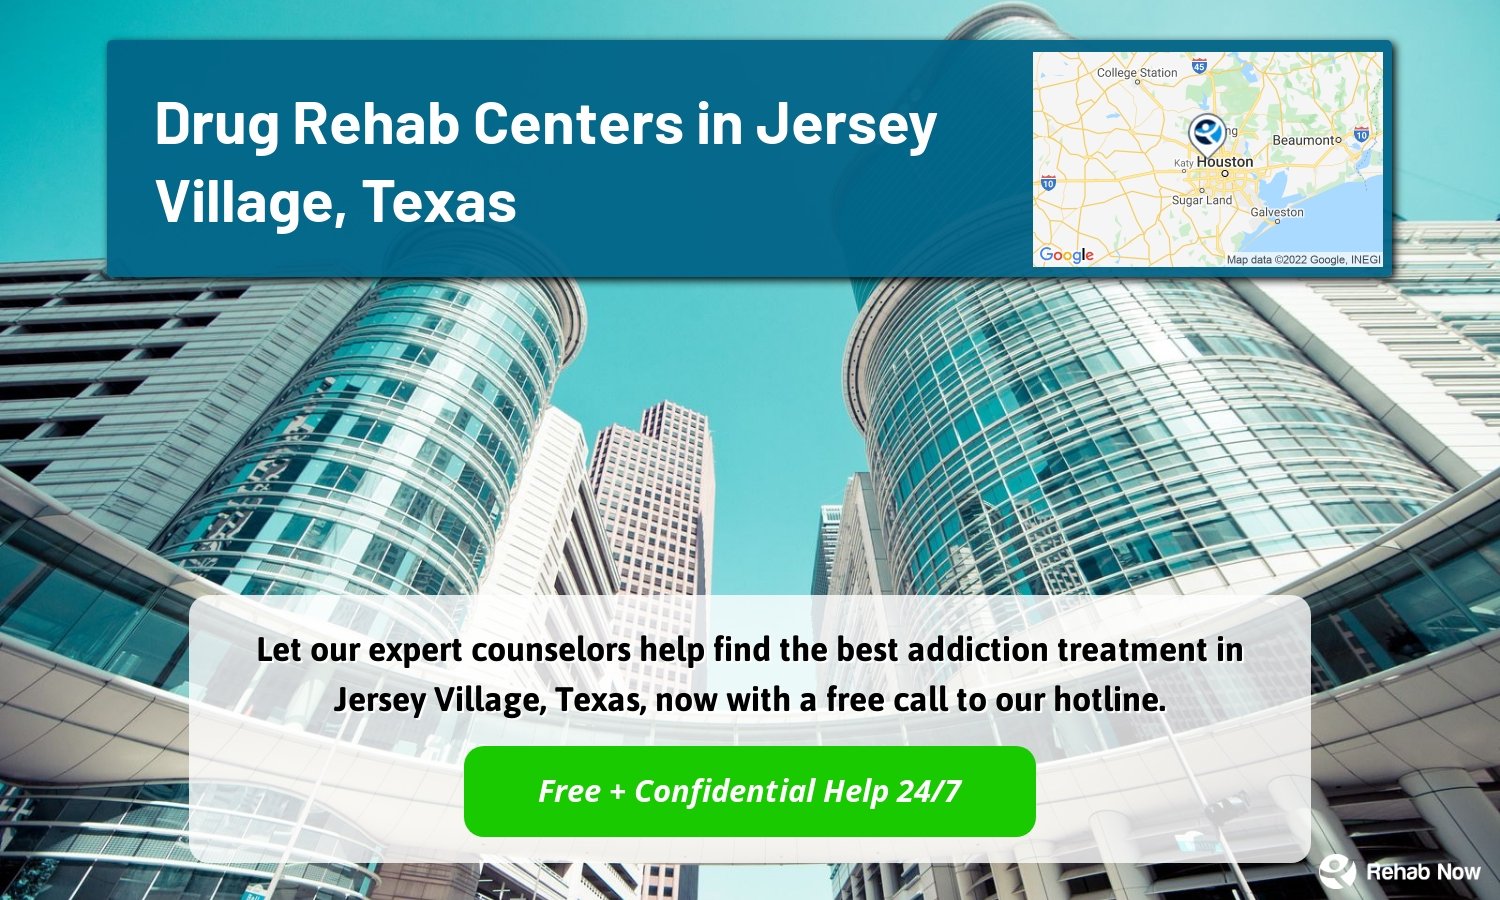 Let our expert counselors help find the best addiction treatment in Jersey Village, Texas, now with a free call to our hotline.